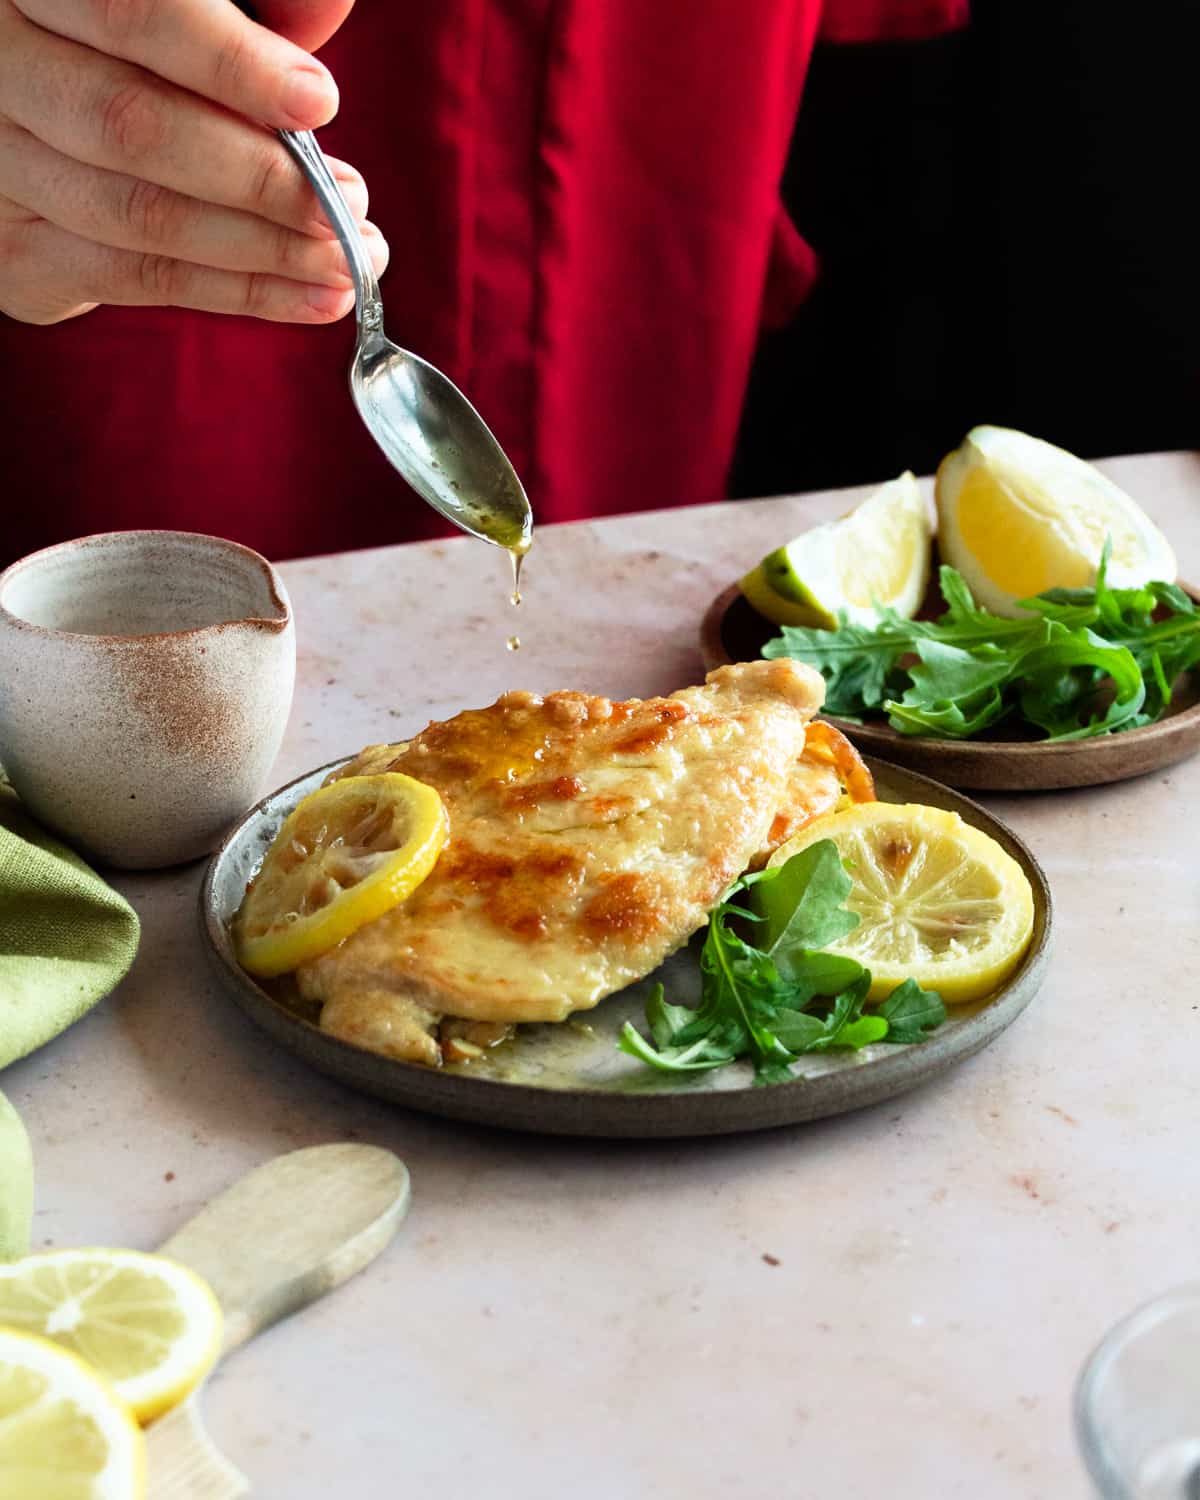 Hands dropping the sauce over the Chicken piccata al limone recipe.